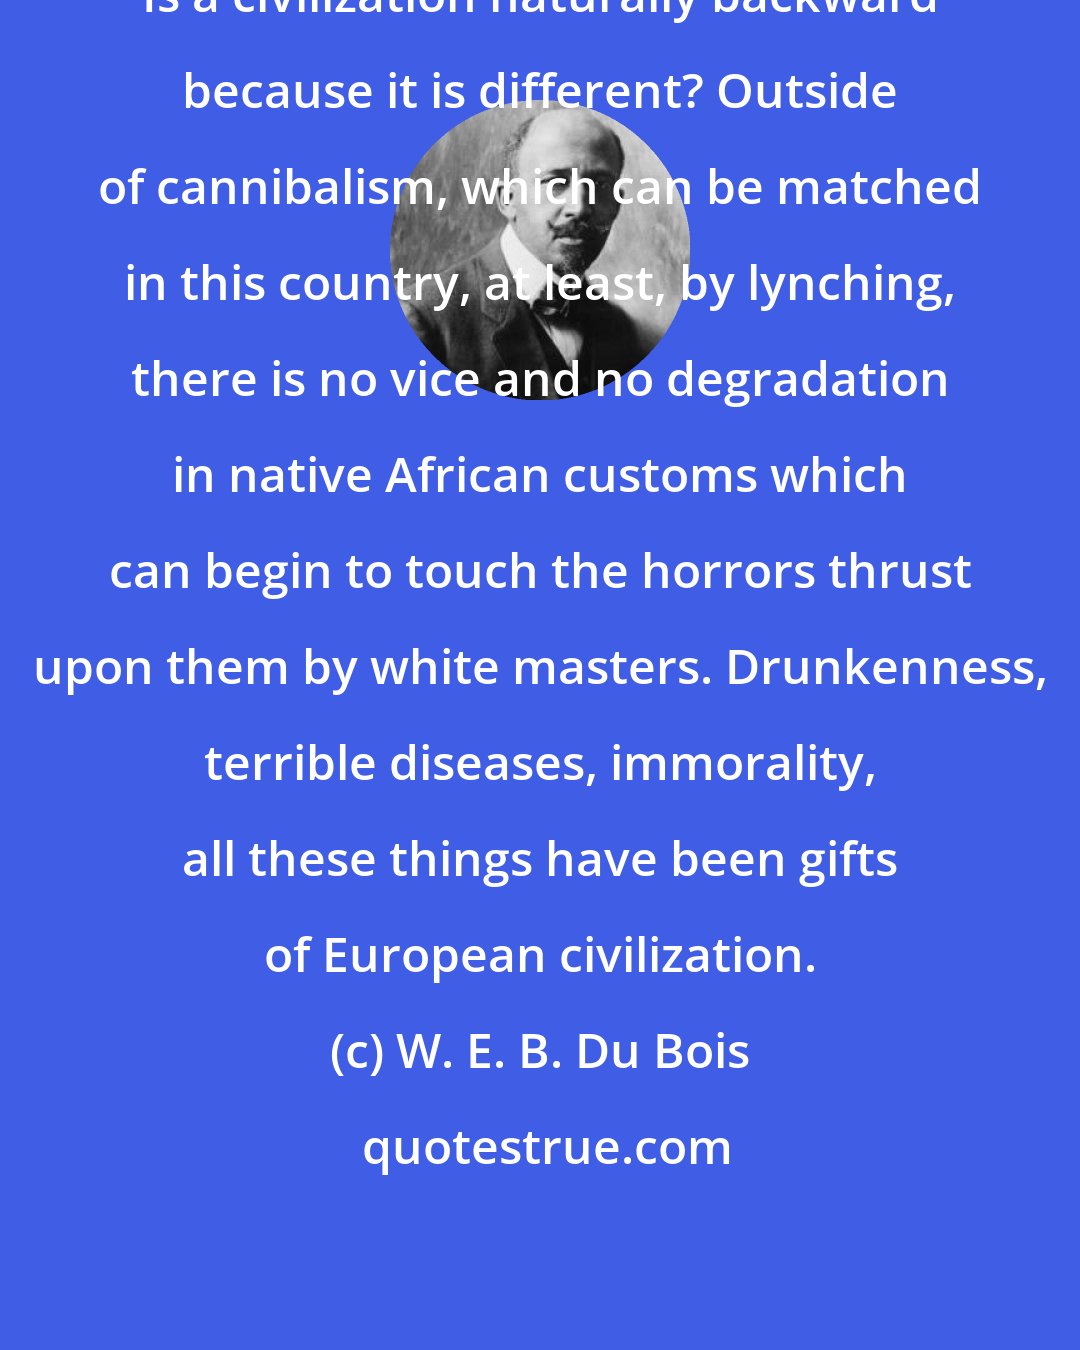 W. E. B. Du Bois: Is a civilization naturally backward because it is different? Outside of cannibalism, which can be matched in this country, at least, by lynching, there is no vice and no degradation in native African customs which can begin to touch the horrors thrust upon them by white masters. Drunkenness, terrible diseases, immorality, all these things have been gifts of European civilization.